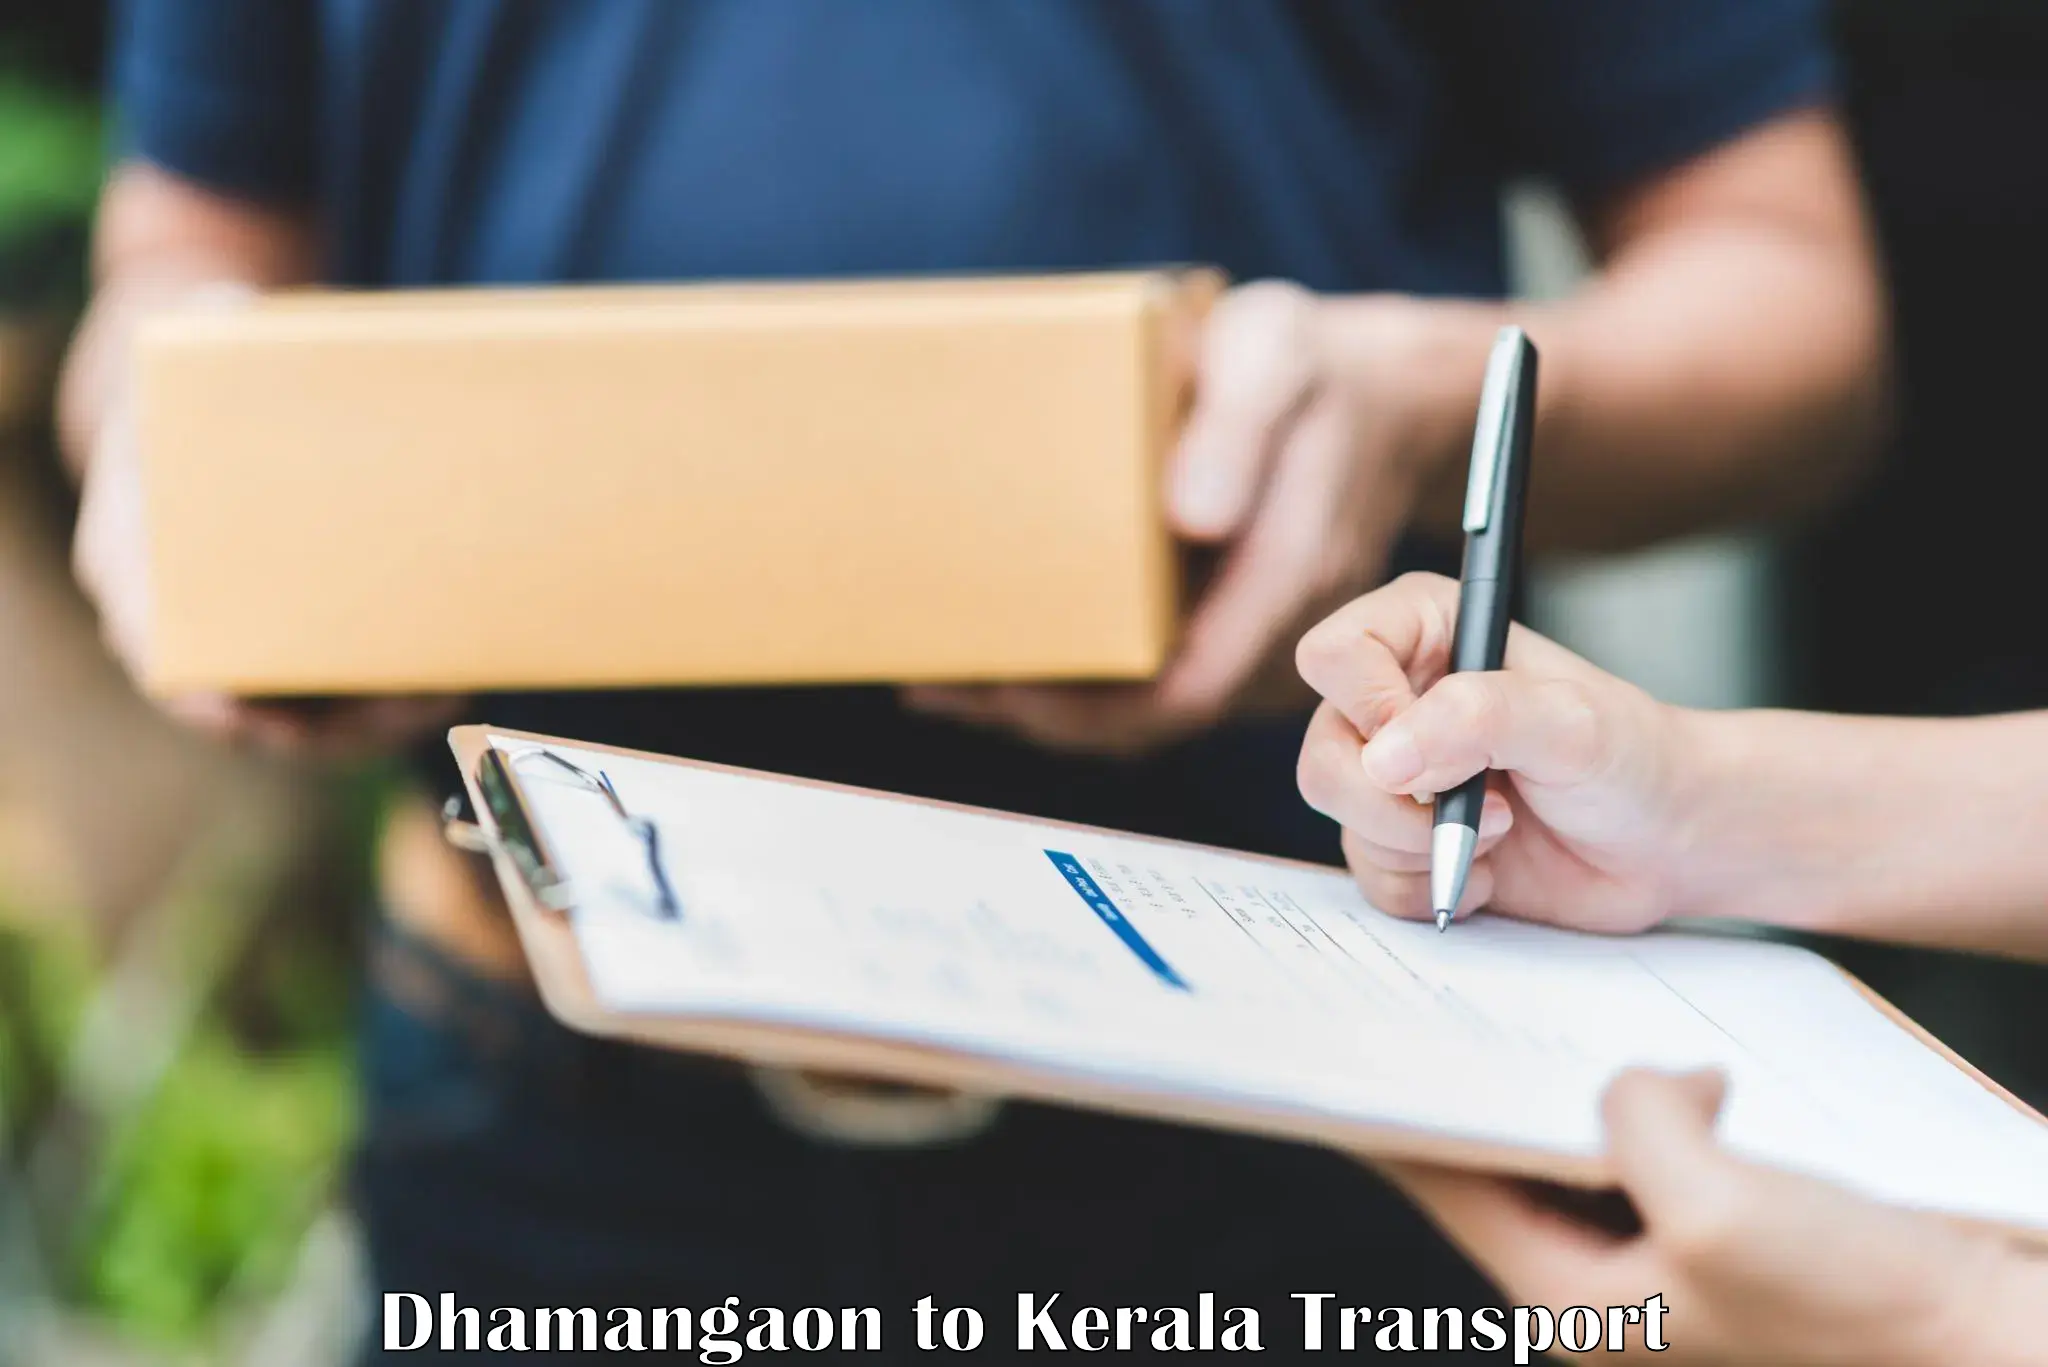 Transport bike from one state to another Dhamangaon to Kerala